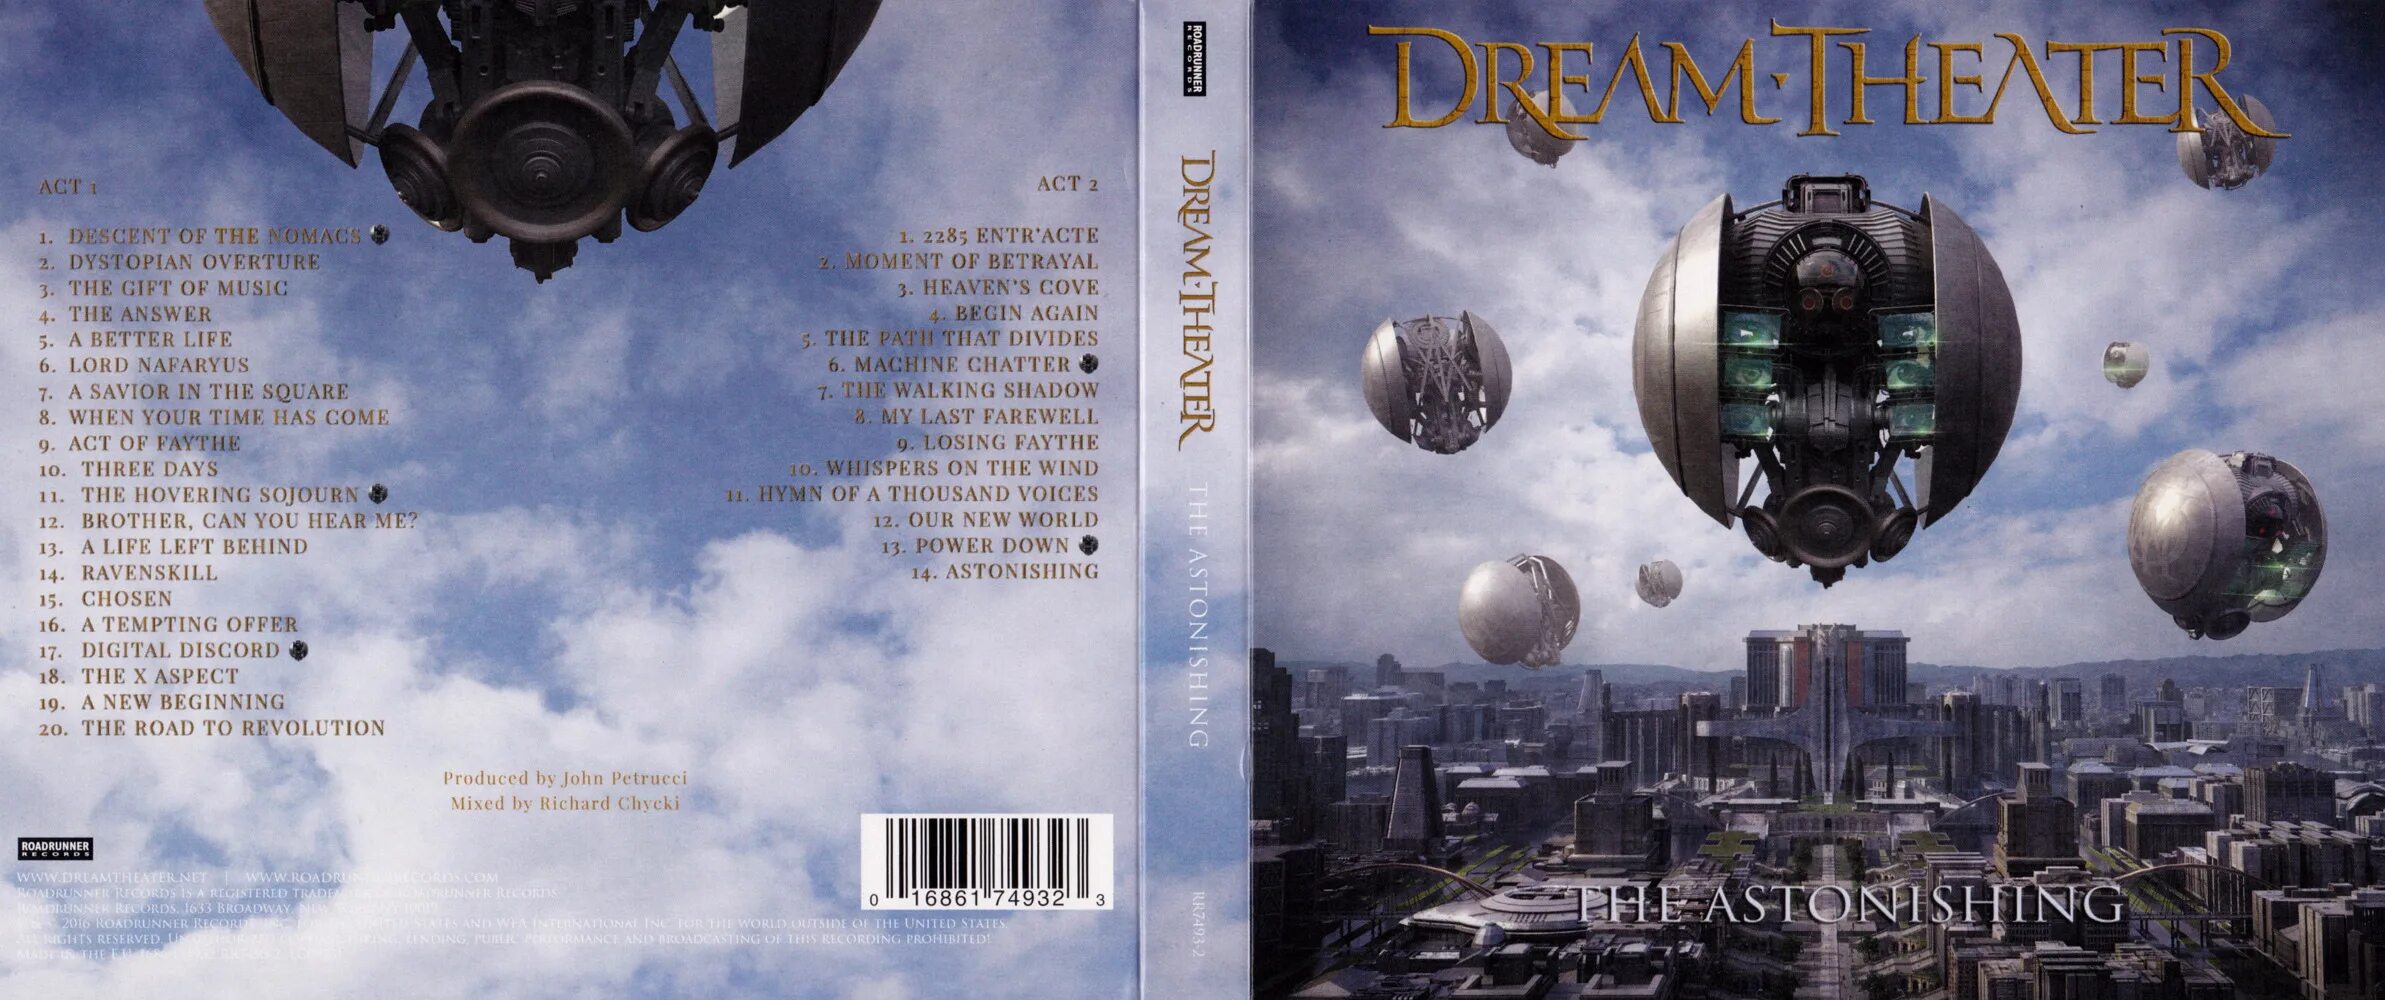 Dream Theater обложки альбомов. Dream Theater the Astonishing. 2016. The Astonishing. Dream Theater a view from the Top of the World обложка. Dream theater альбомы